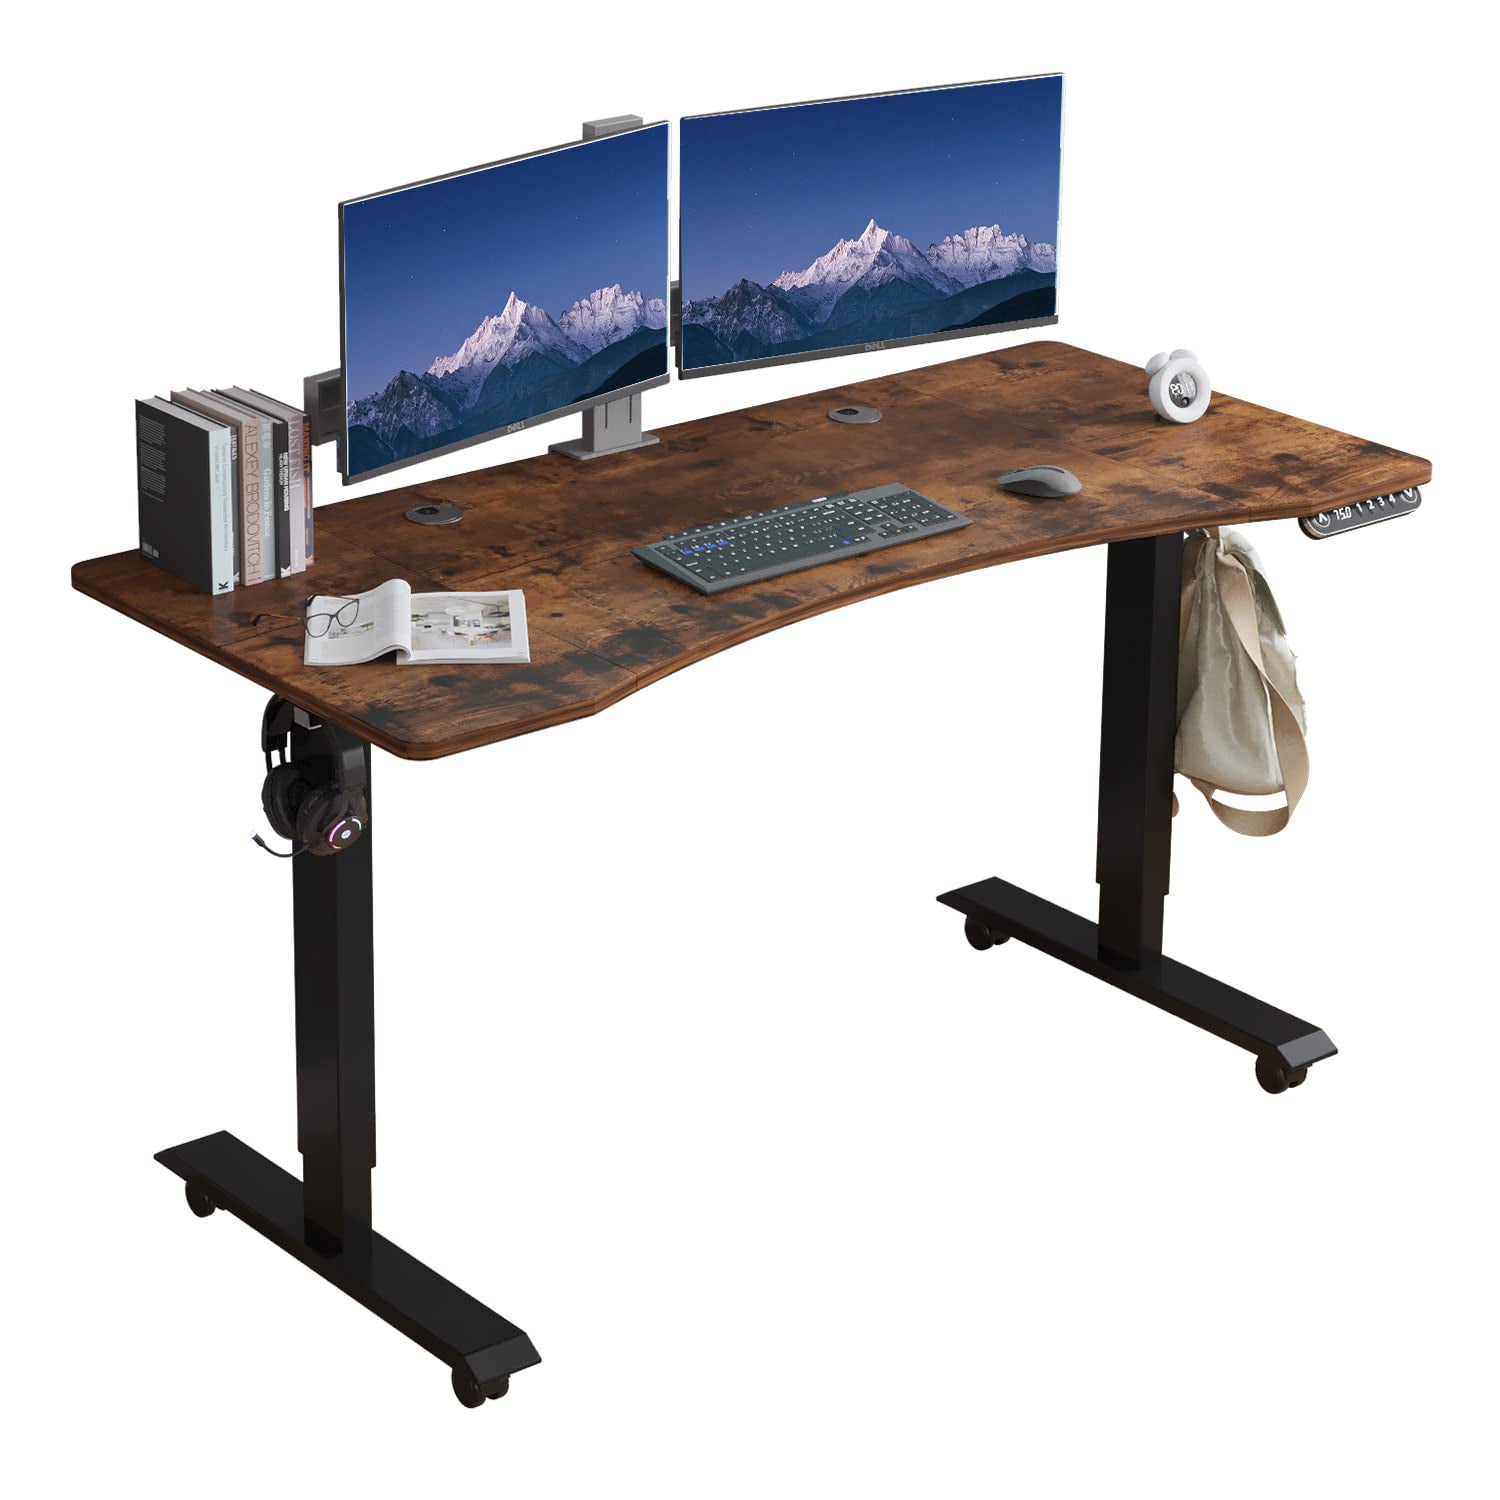 Deskohilo 55"x 30" Standing Desk Electric Height Adjustable Office Tables for Work Benches with Wheels, Oak or Brown